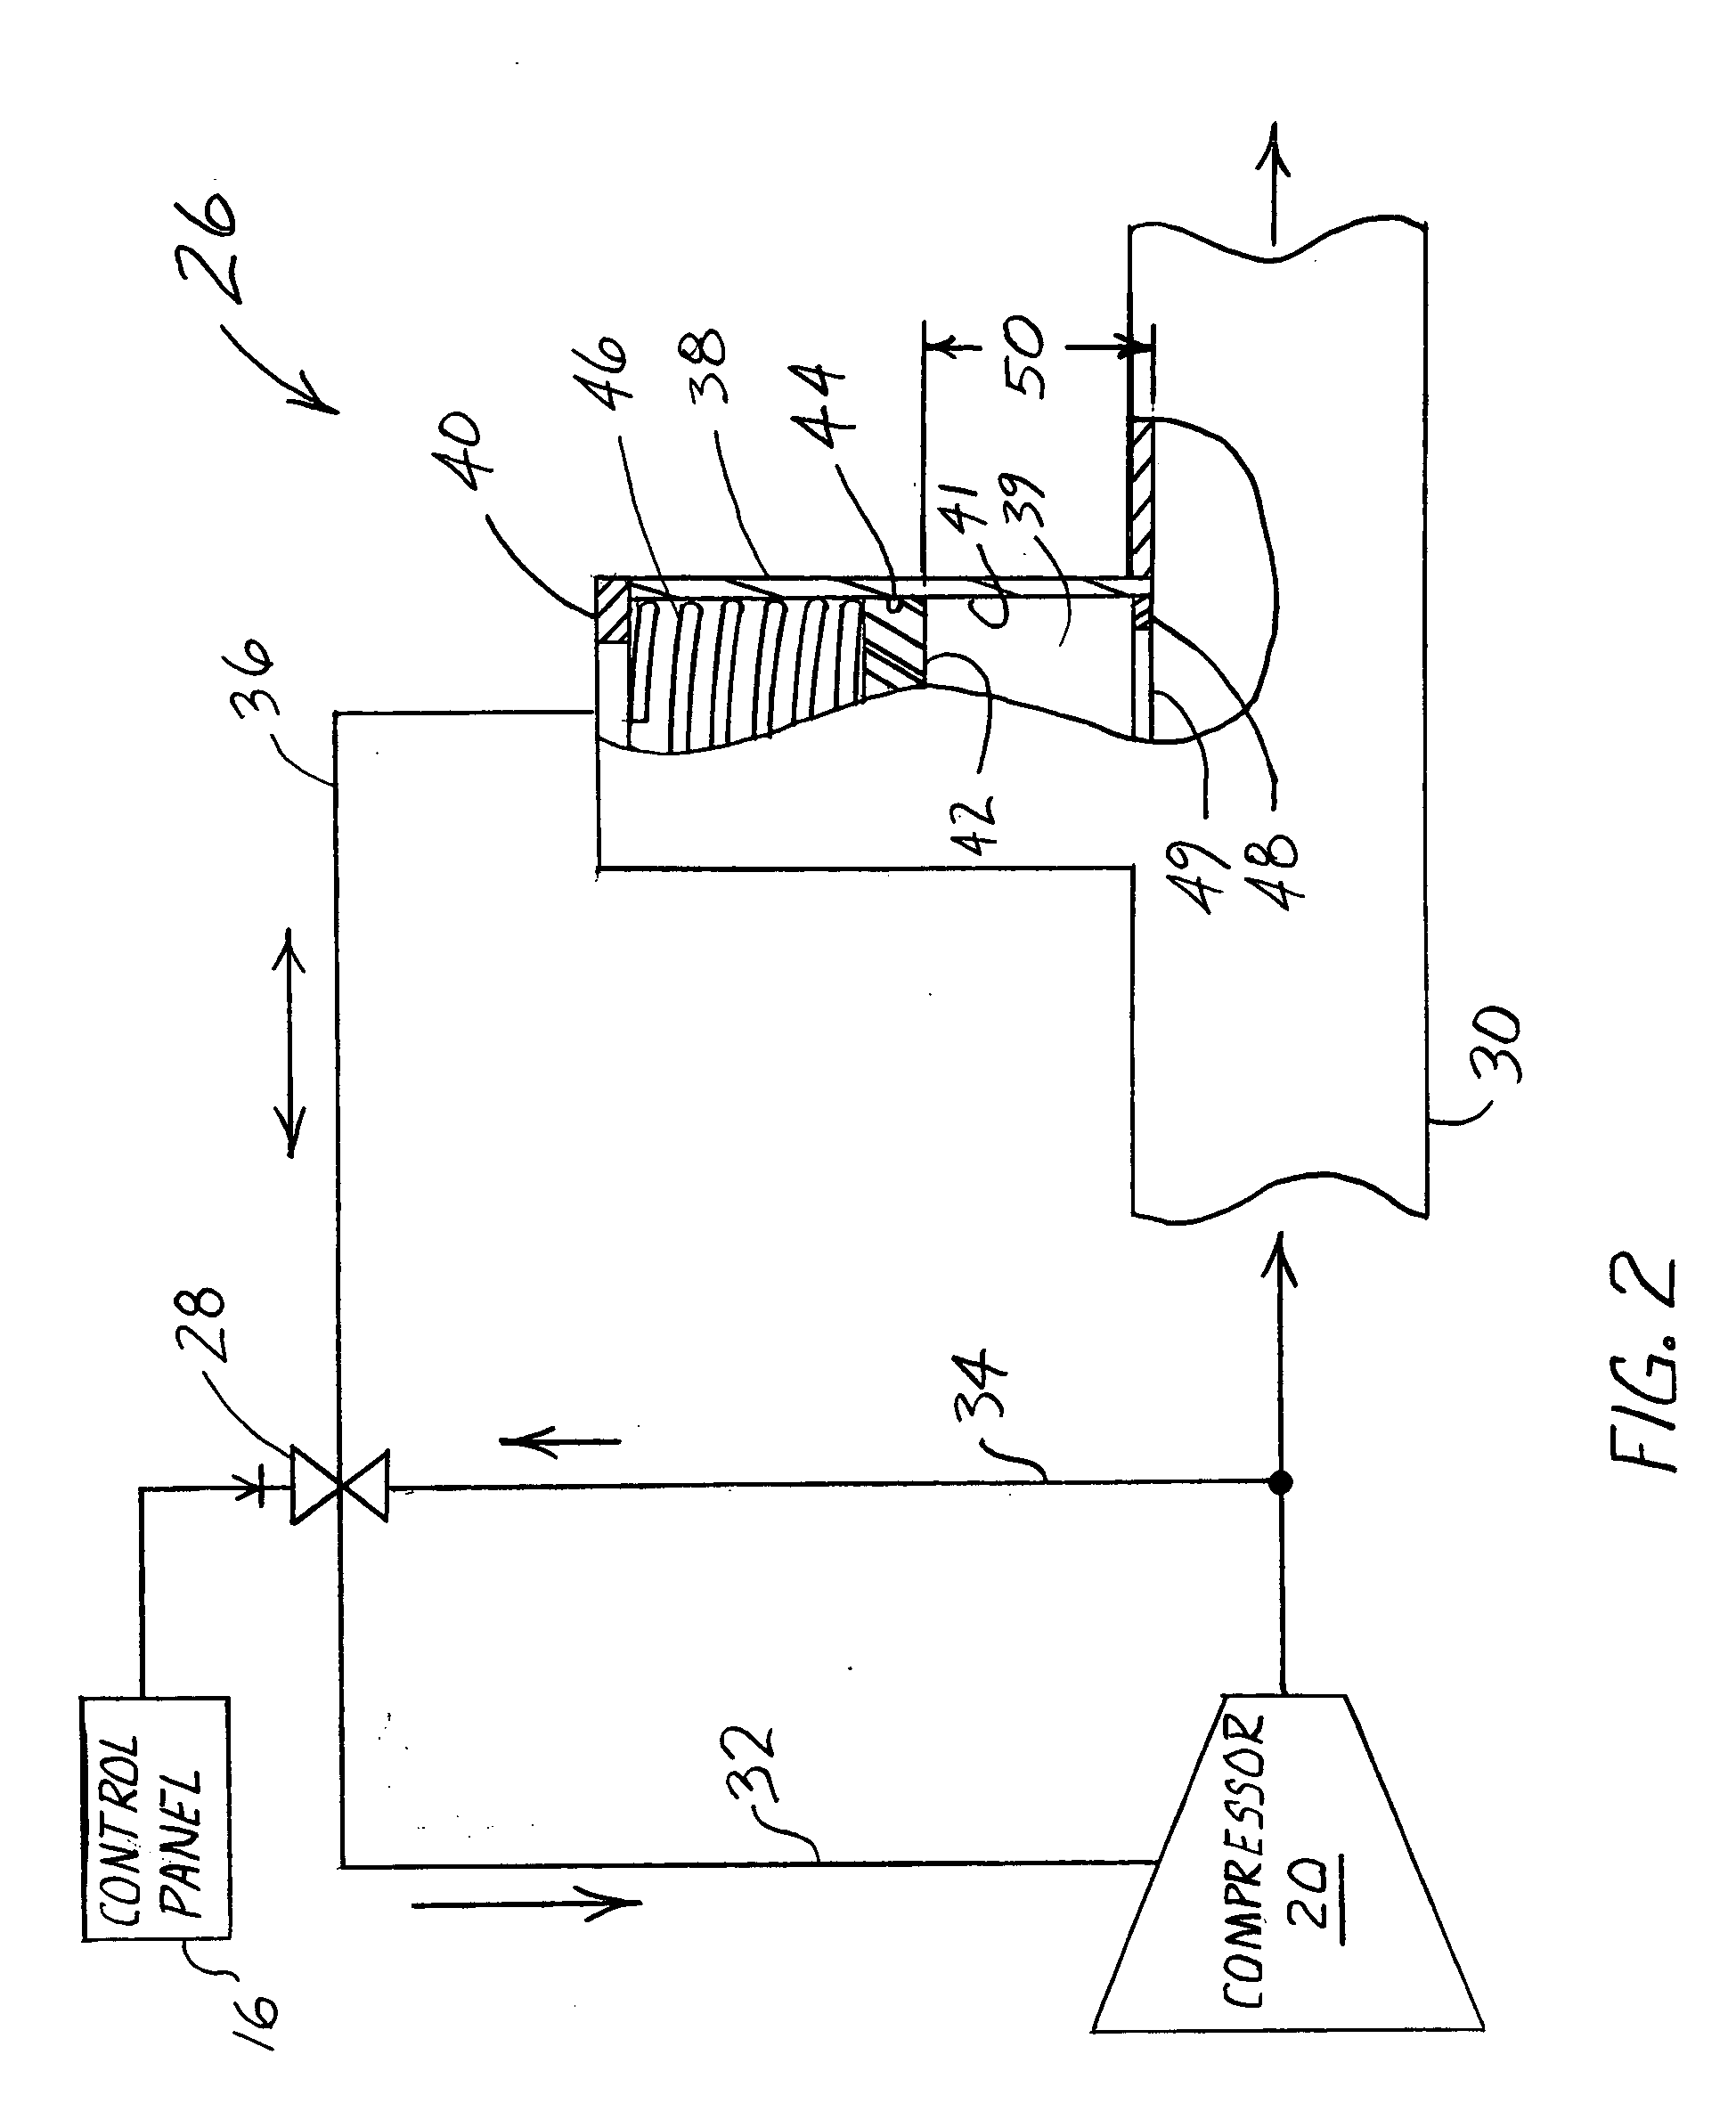 Apparatus and method of sound attenuation in a system employing a VSD and a quarter-wave resonator